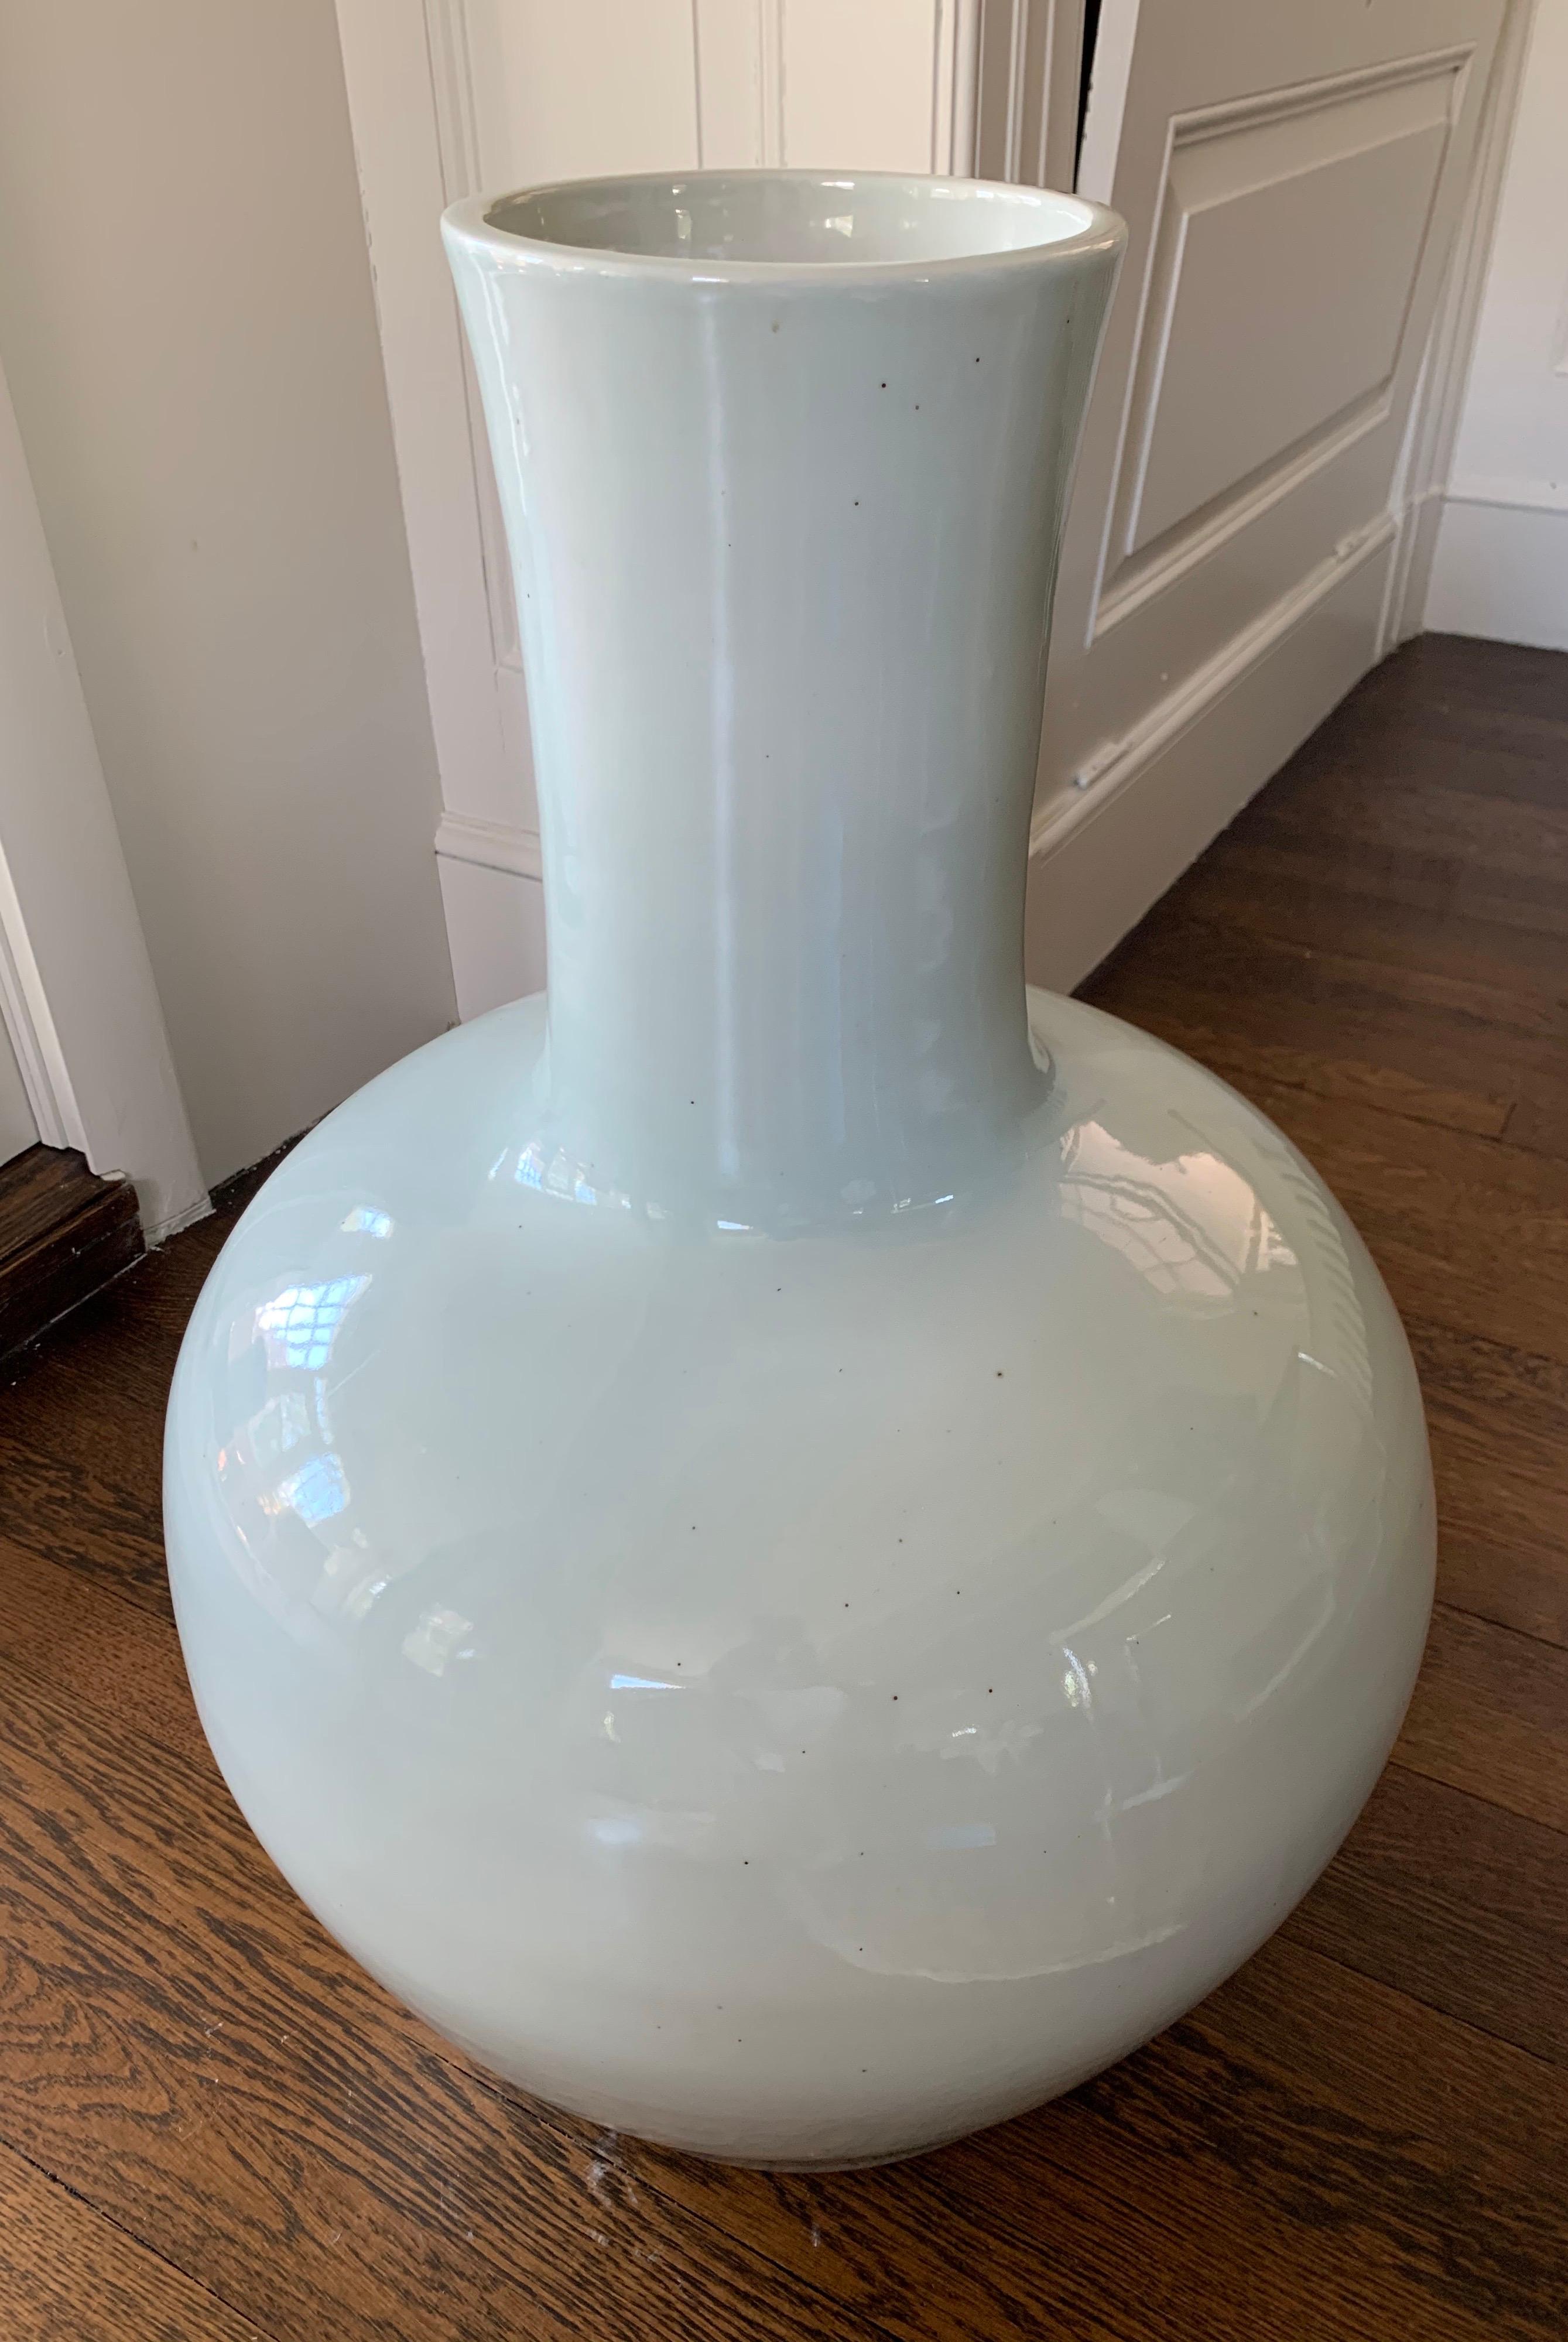 This extra large Chinese celadon vase is made of white porcelain covered overall with a soft green glaze of even tone. The body is symmetrical, elegant, and simple. It’s stark simplicity and beauty will stand alongside a collection in a traditional